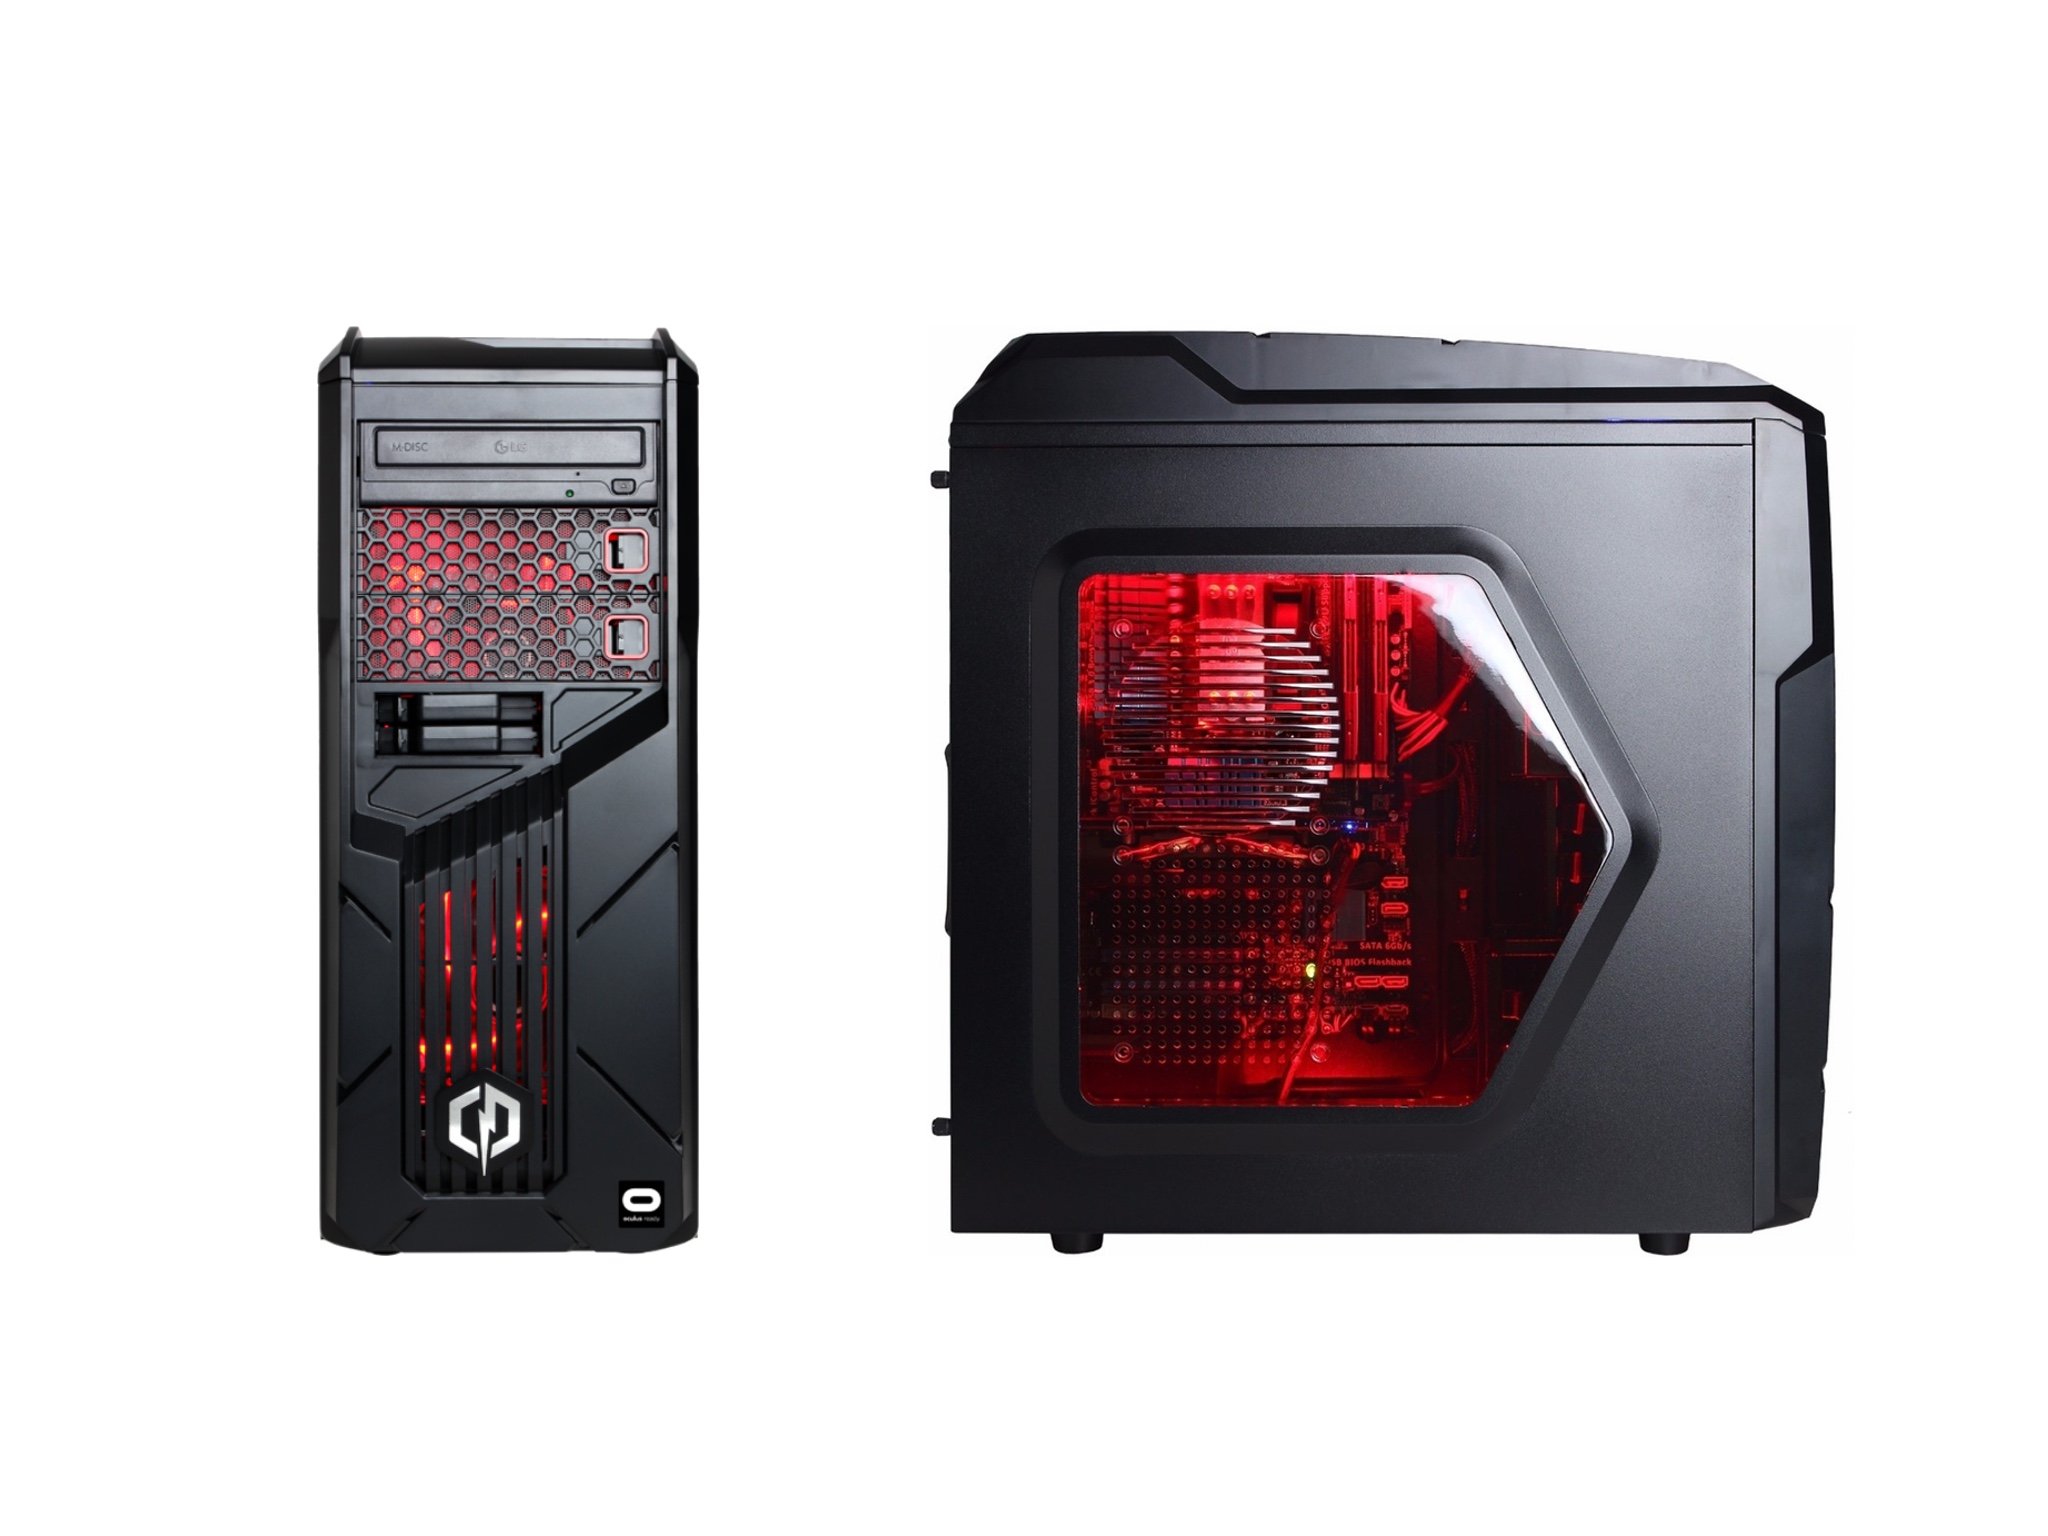 CyberPowerPC launches $499 AMD-powered Oculus Ready gaming PC